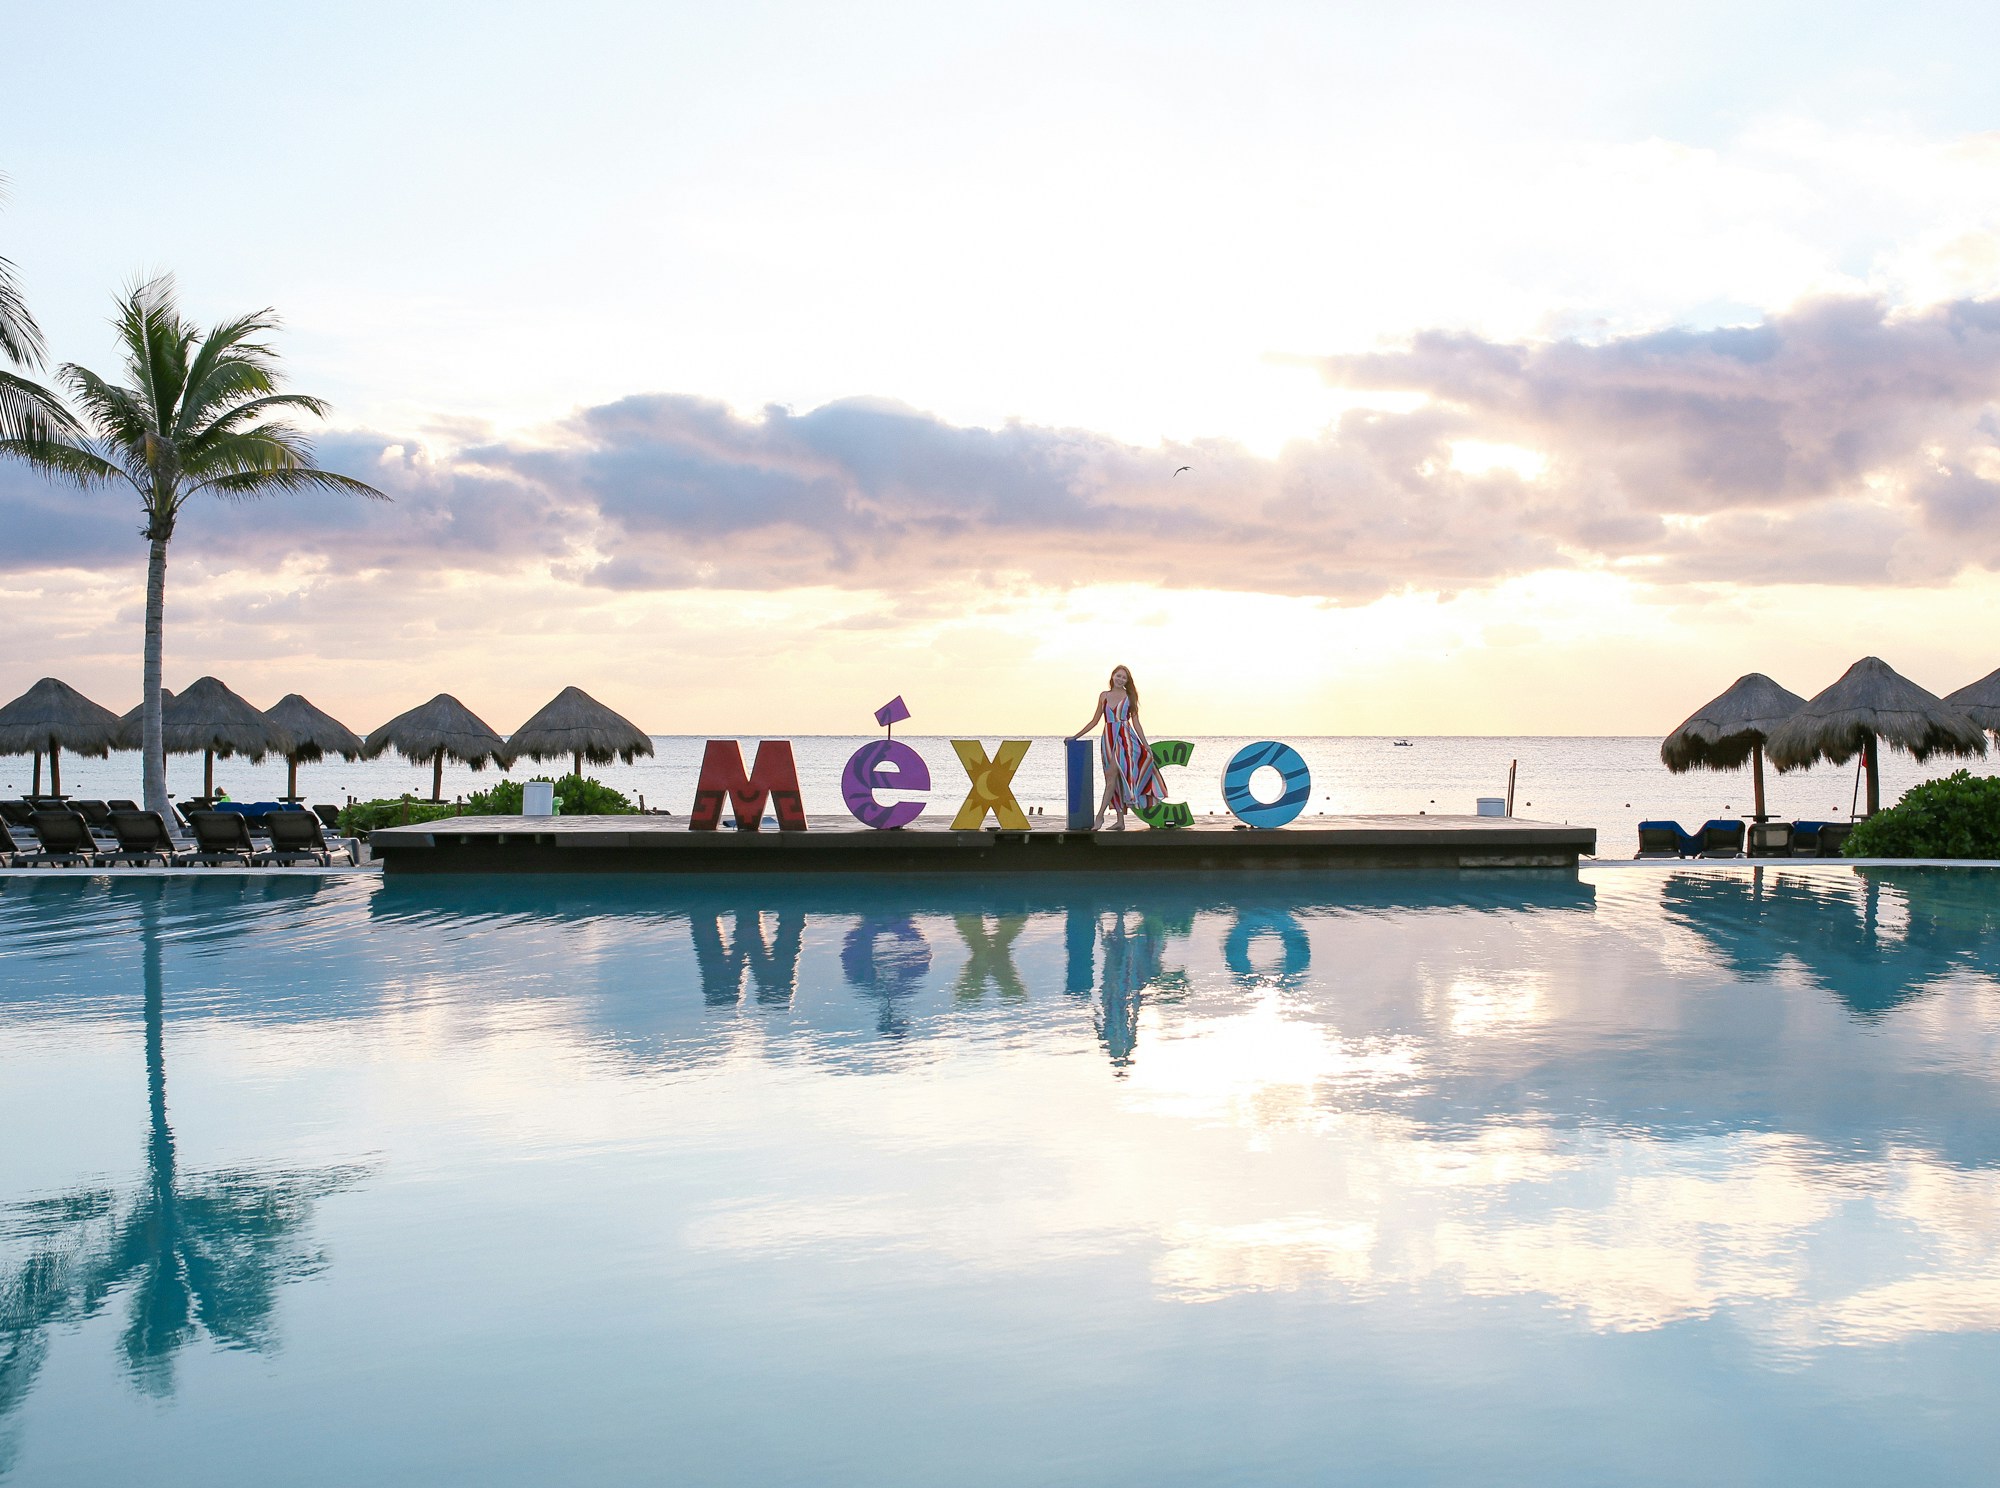 In January, I stayed at Ocean Riviera Paradise in Playa del Carmen, Mexico and had a lovely time. The food, hotel design and amenities were fabulous. Read more for my full thoughts and review on this all-inclusive resort.